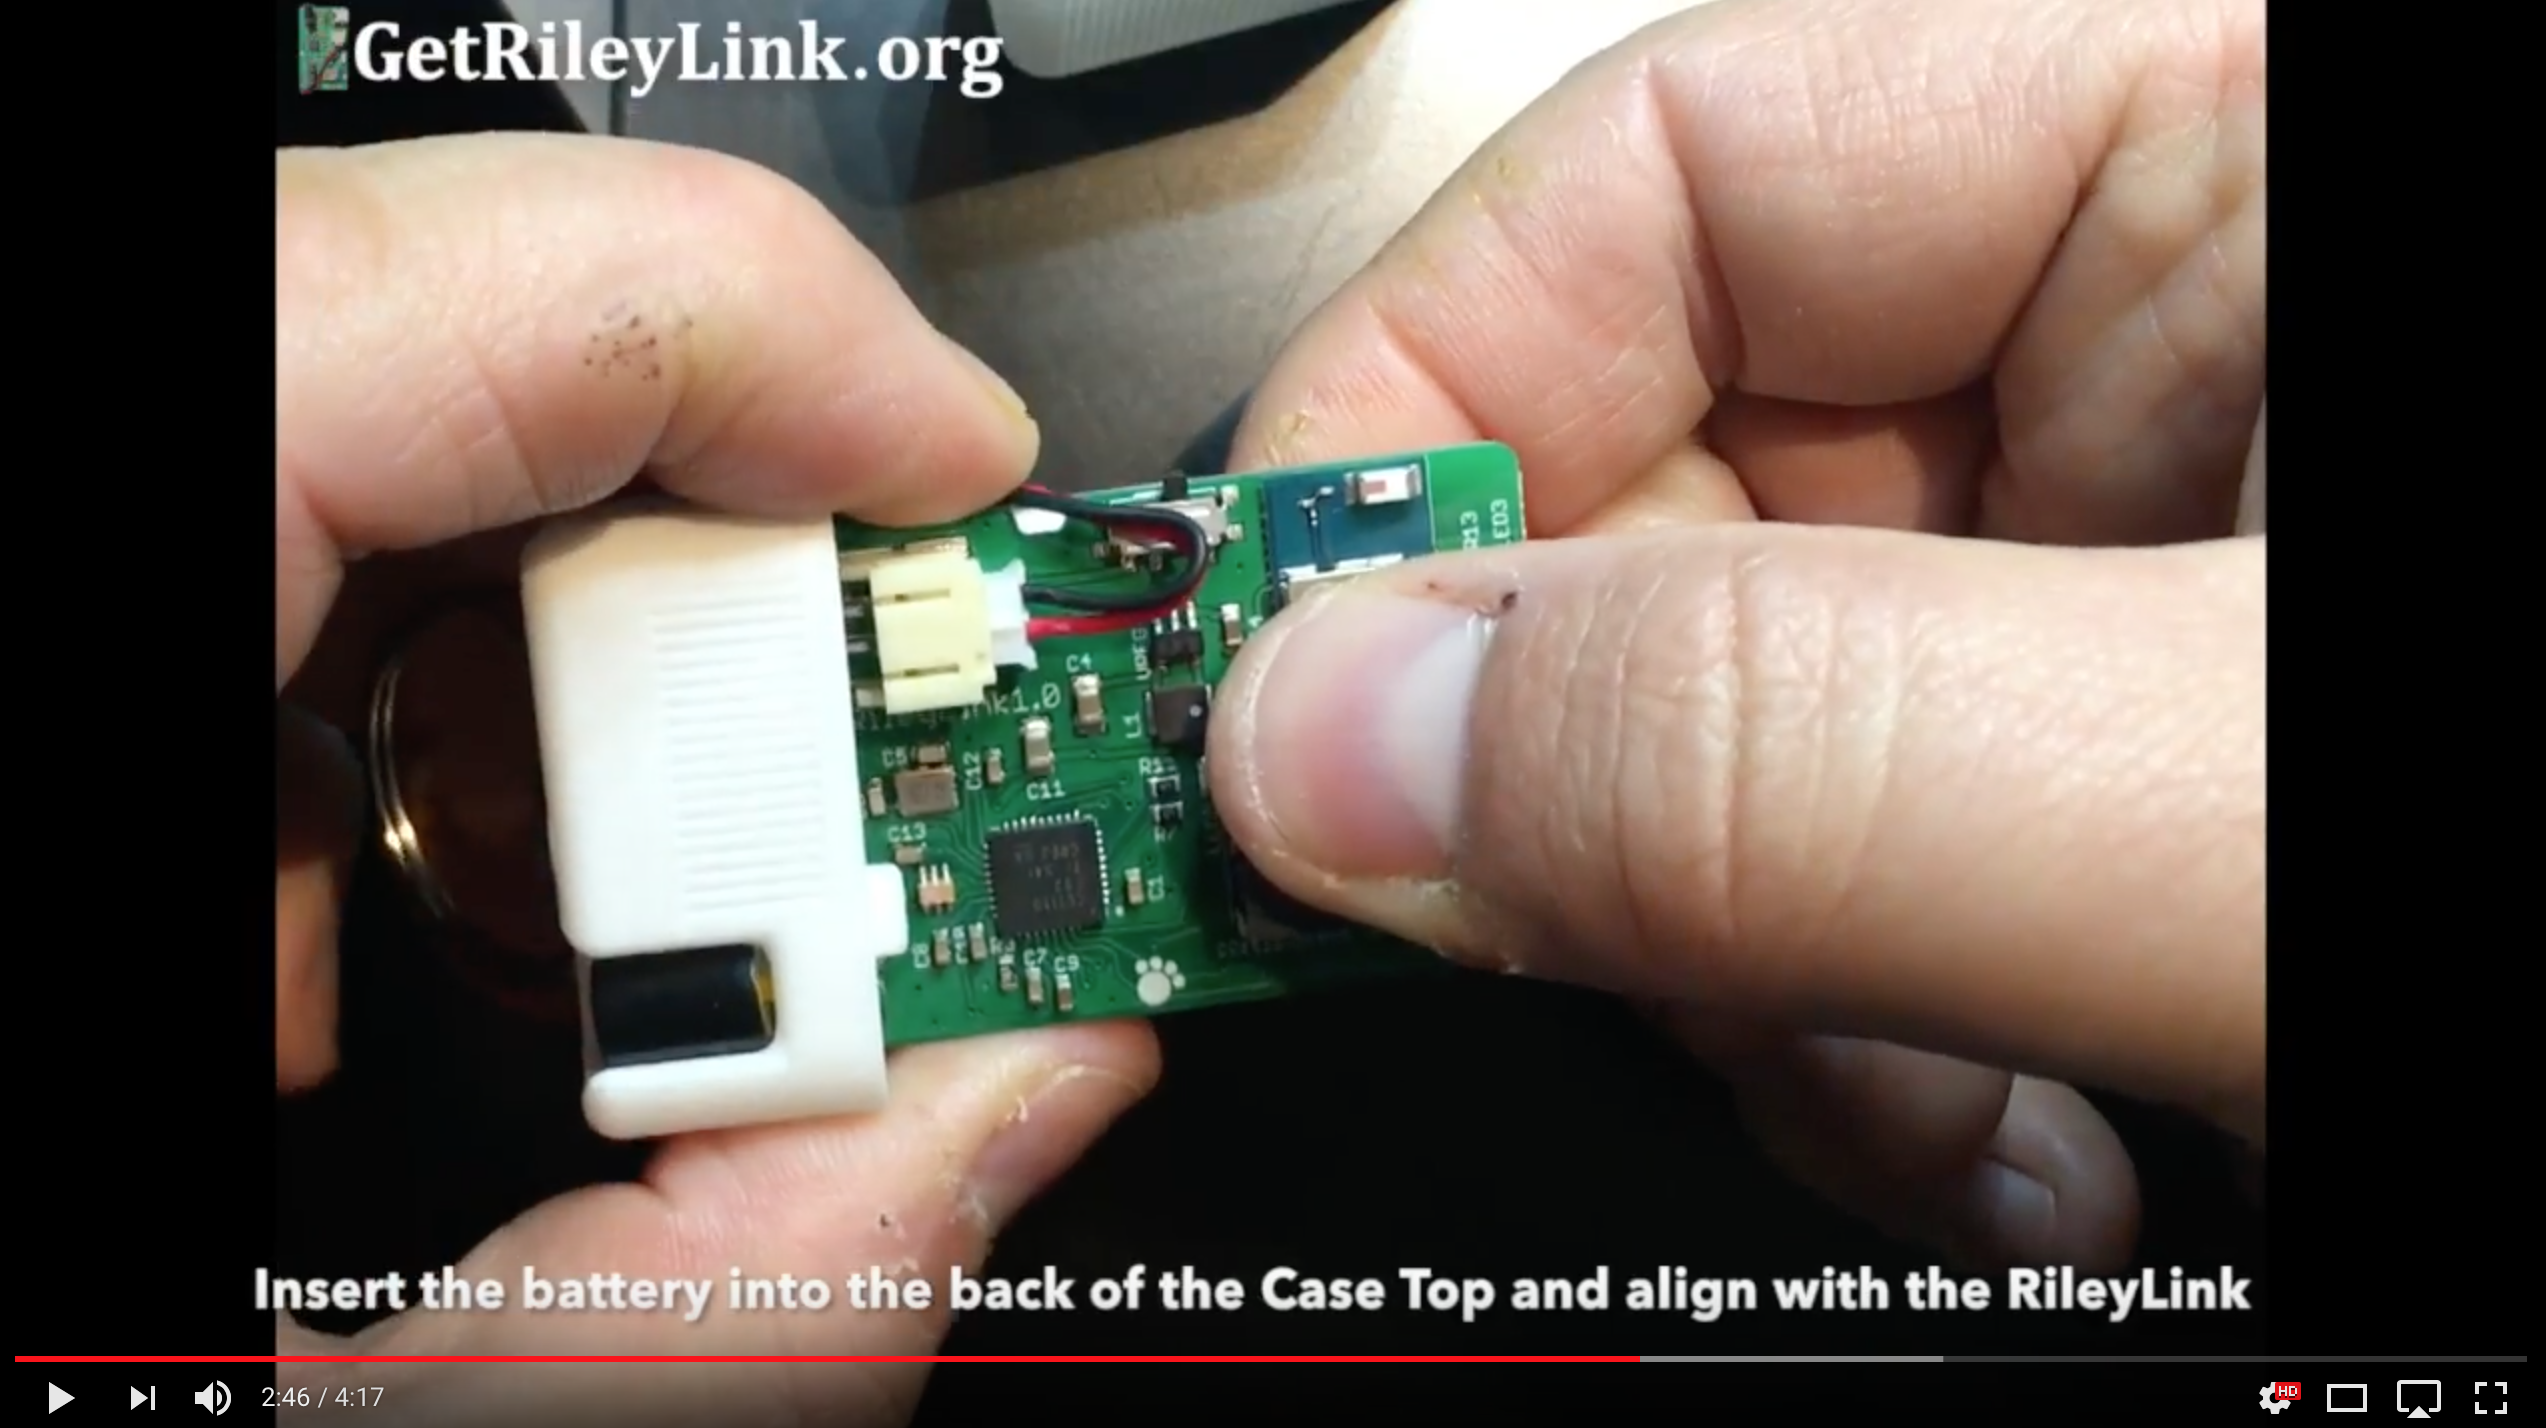 frame for video on how to insert RileyLink into slim case, follow link for video